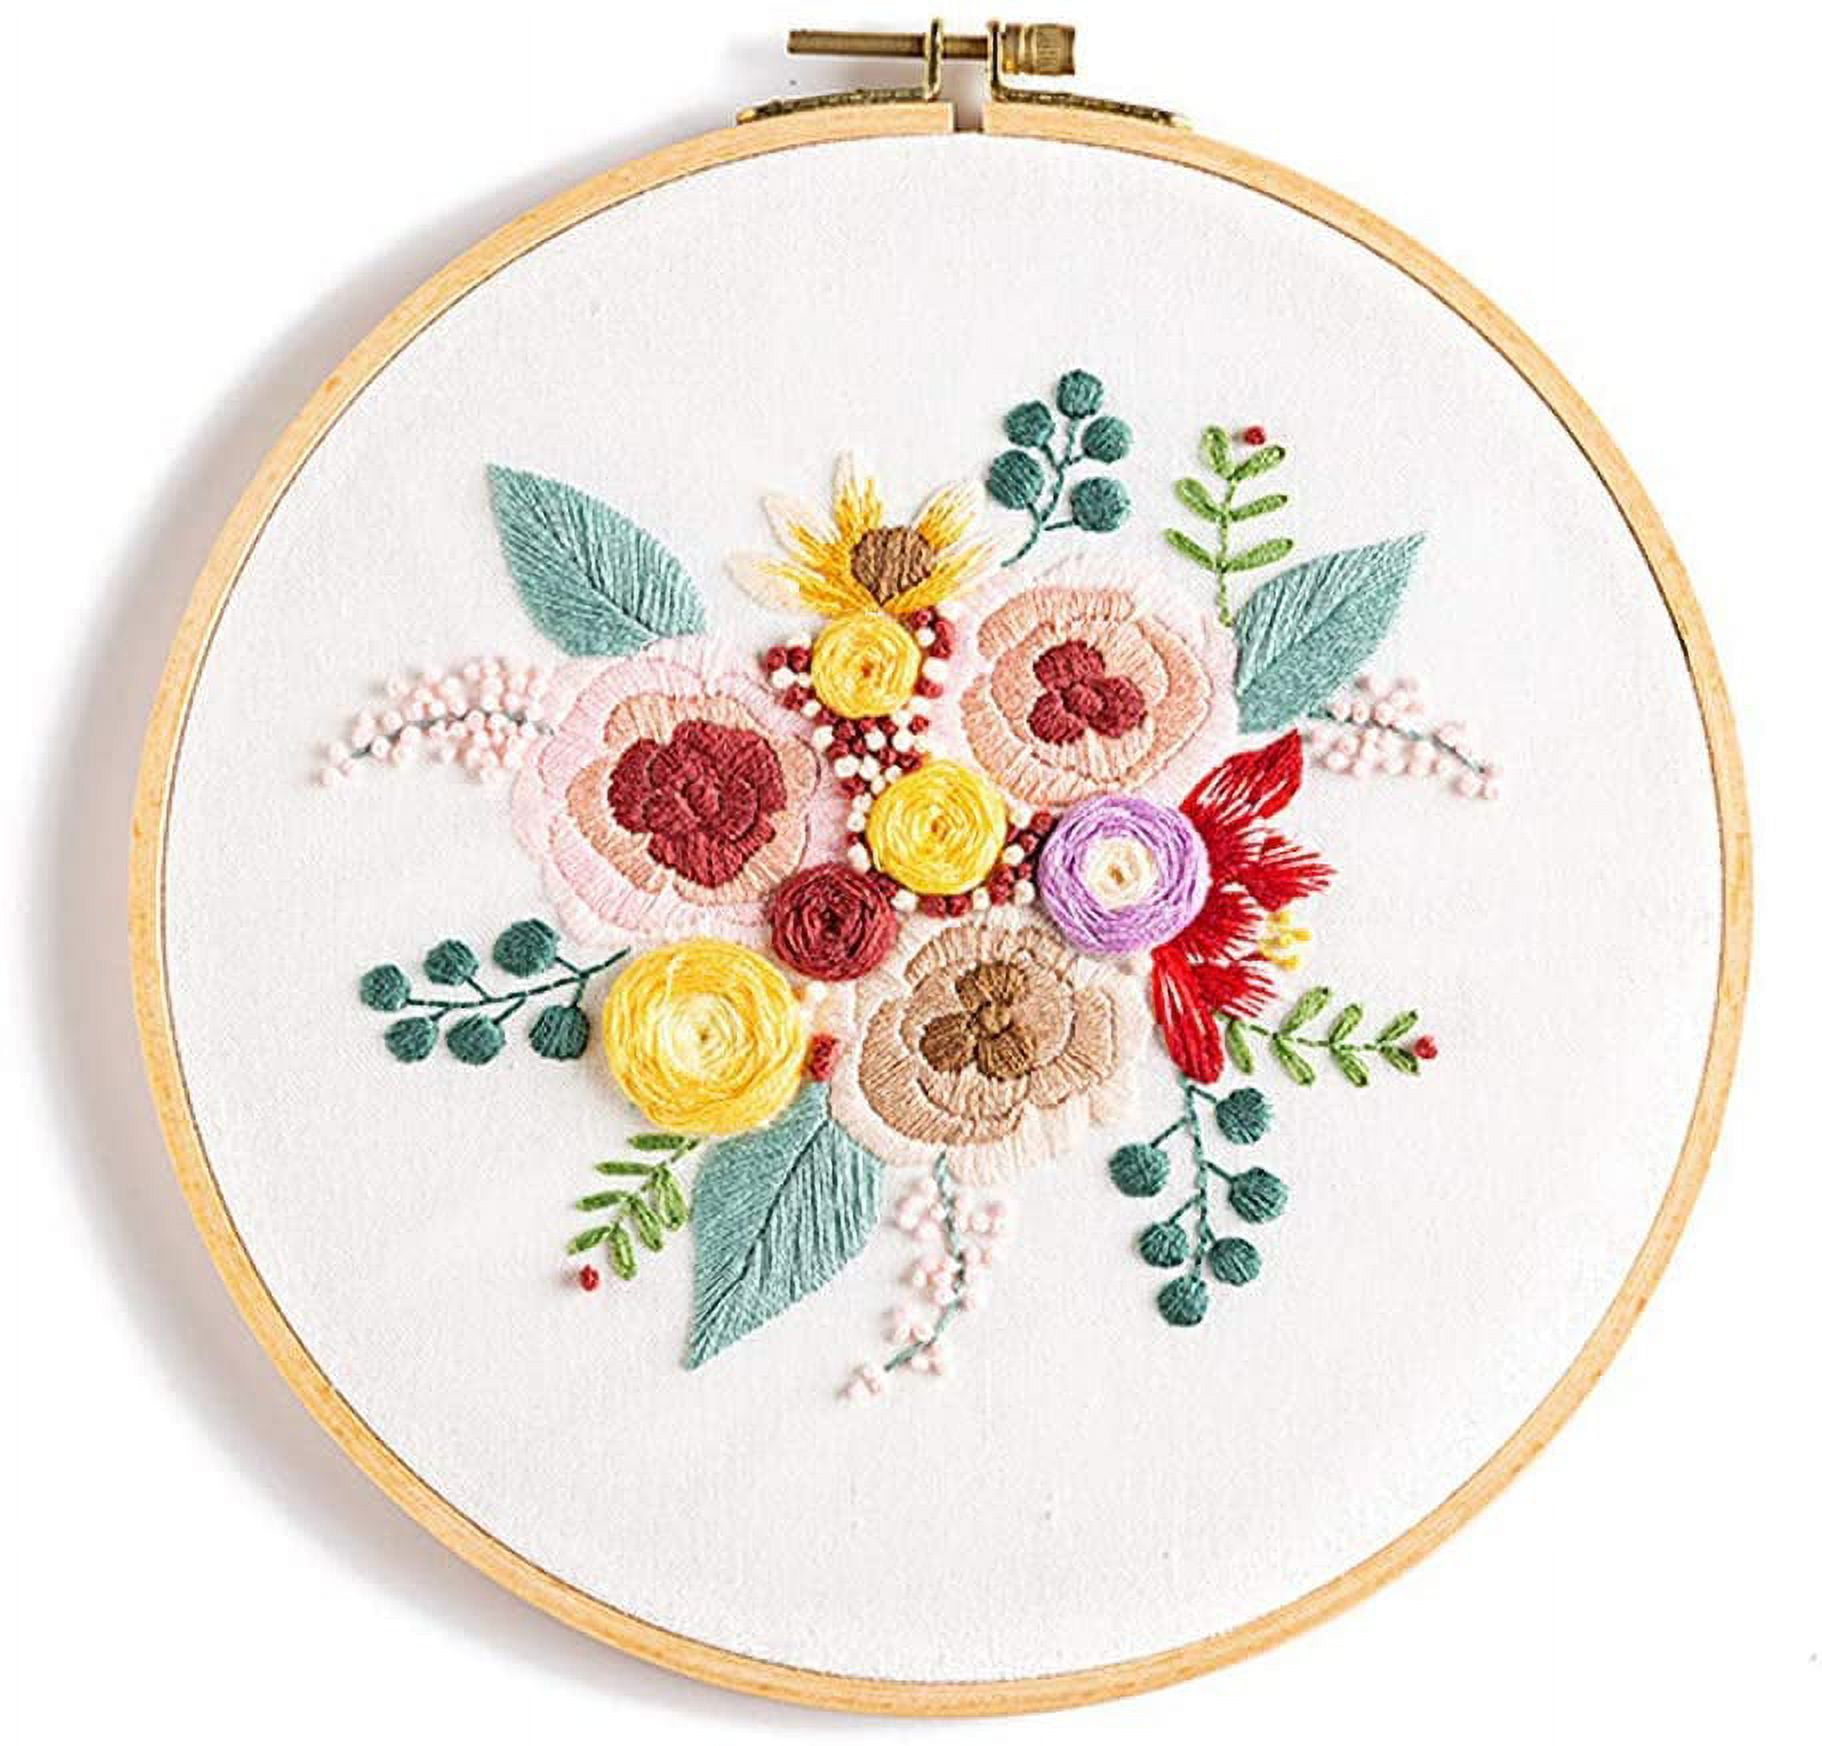 Maydear Stamped Cross Stitch Kits, Needlepoint Embroidery Kits for Beginner  Kids or Adults, 14CT 2 Strands DIY Easy Counted Cross Stitch Kit - Three  Flower 15.4×11.4 inch 